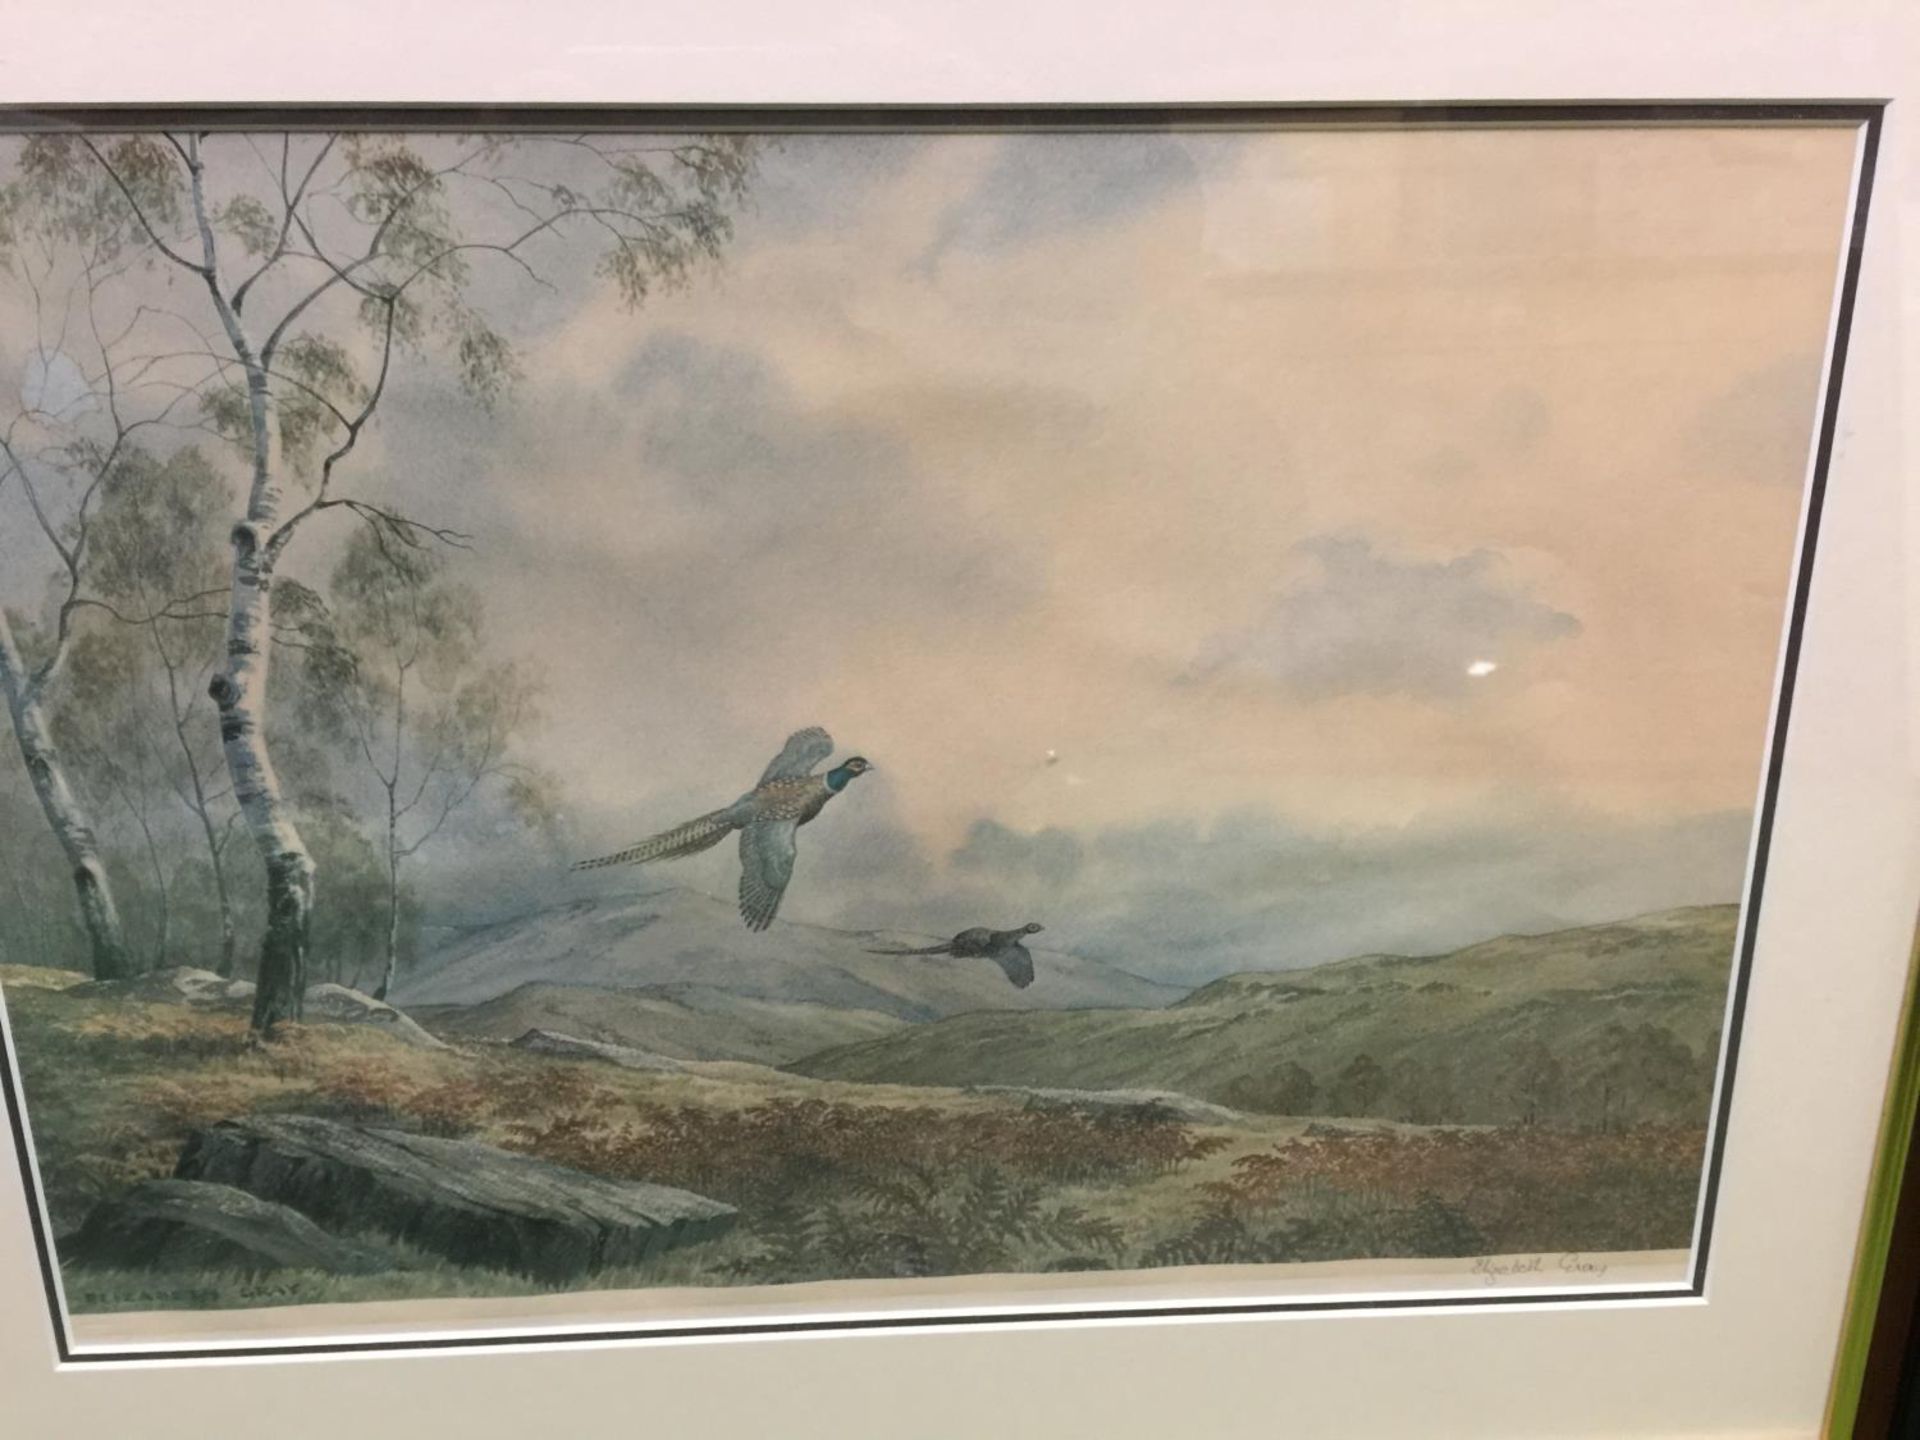 TWO LARGE FRAMED PRINTS SIGNED BY ELIZABETH GRAY, ONE OF DUCKS FLYING OVER WATER, THE OTHER - Image 3 of 3